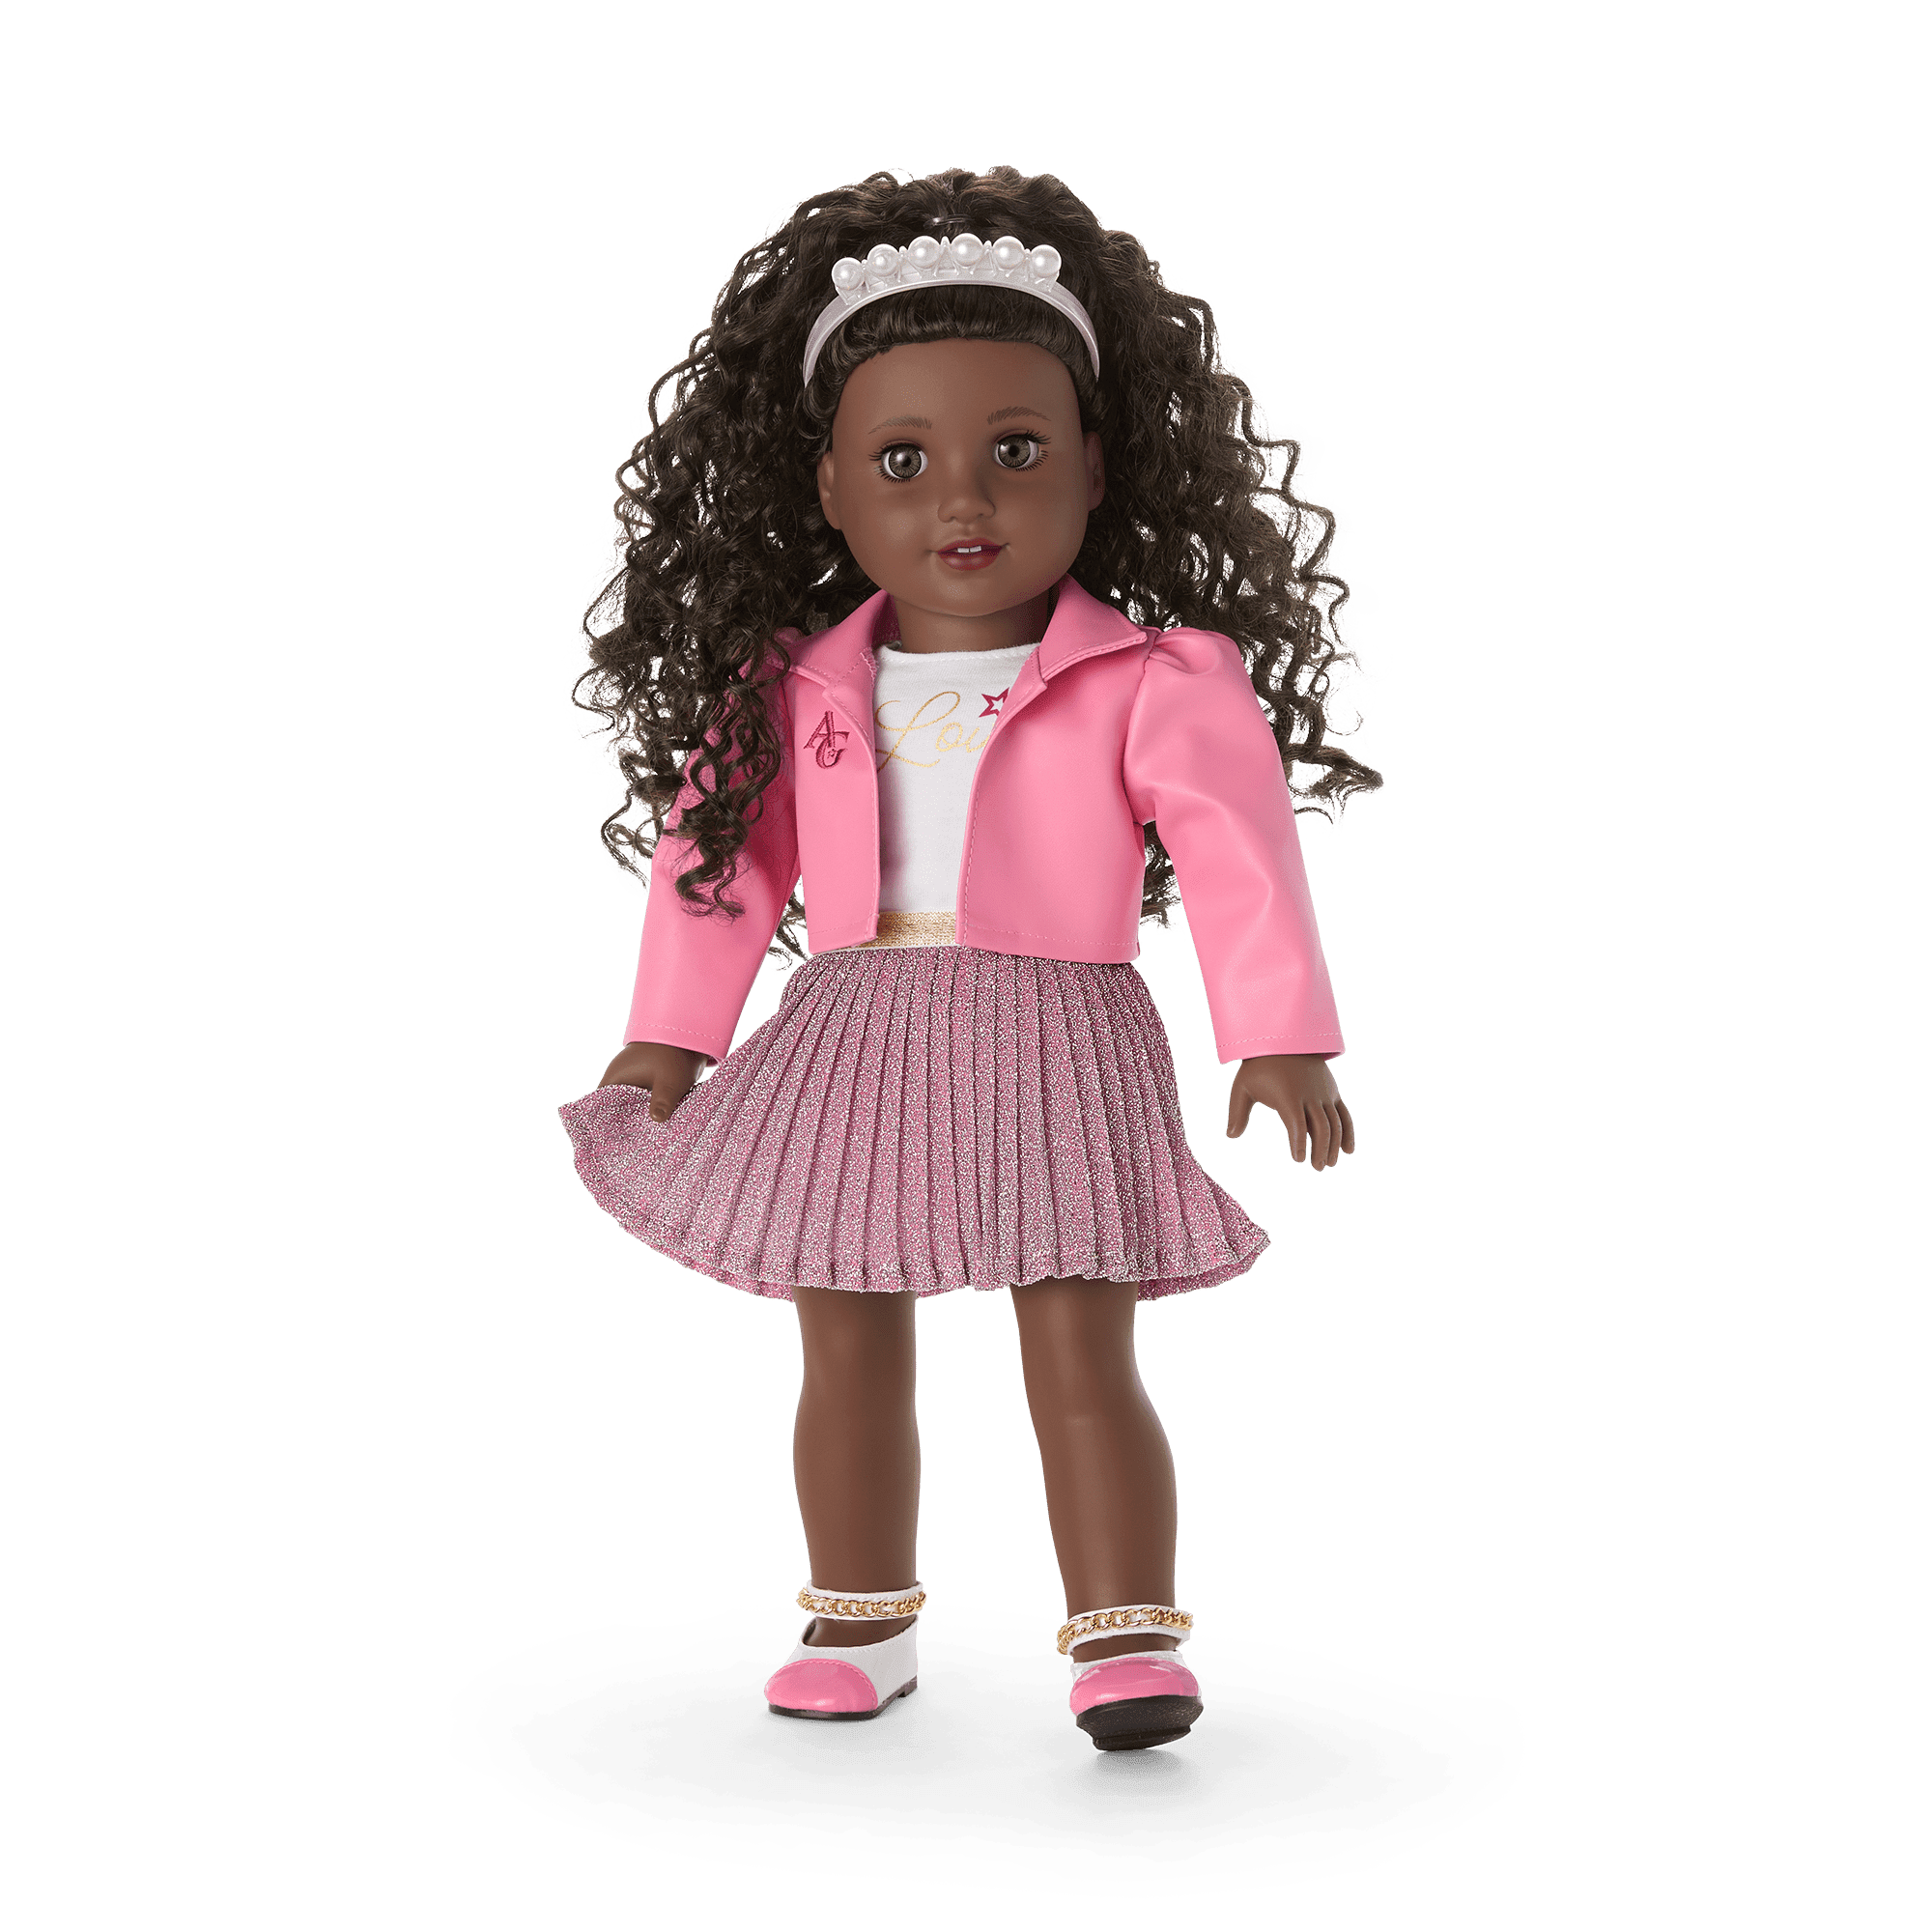 Celebrity Chic Outfit for 18-inch Dolls